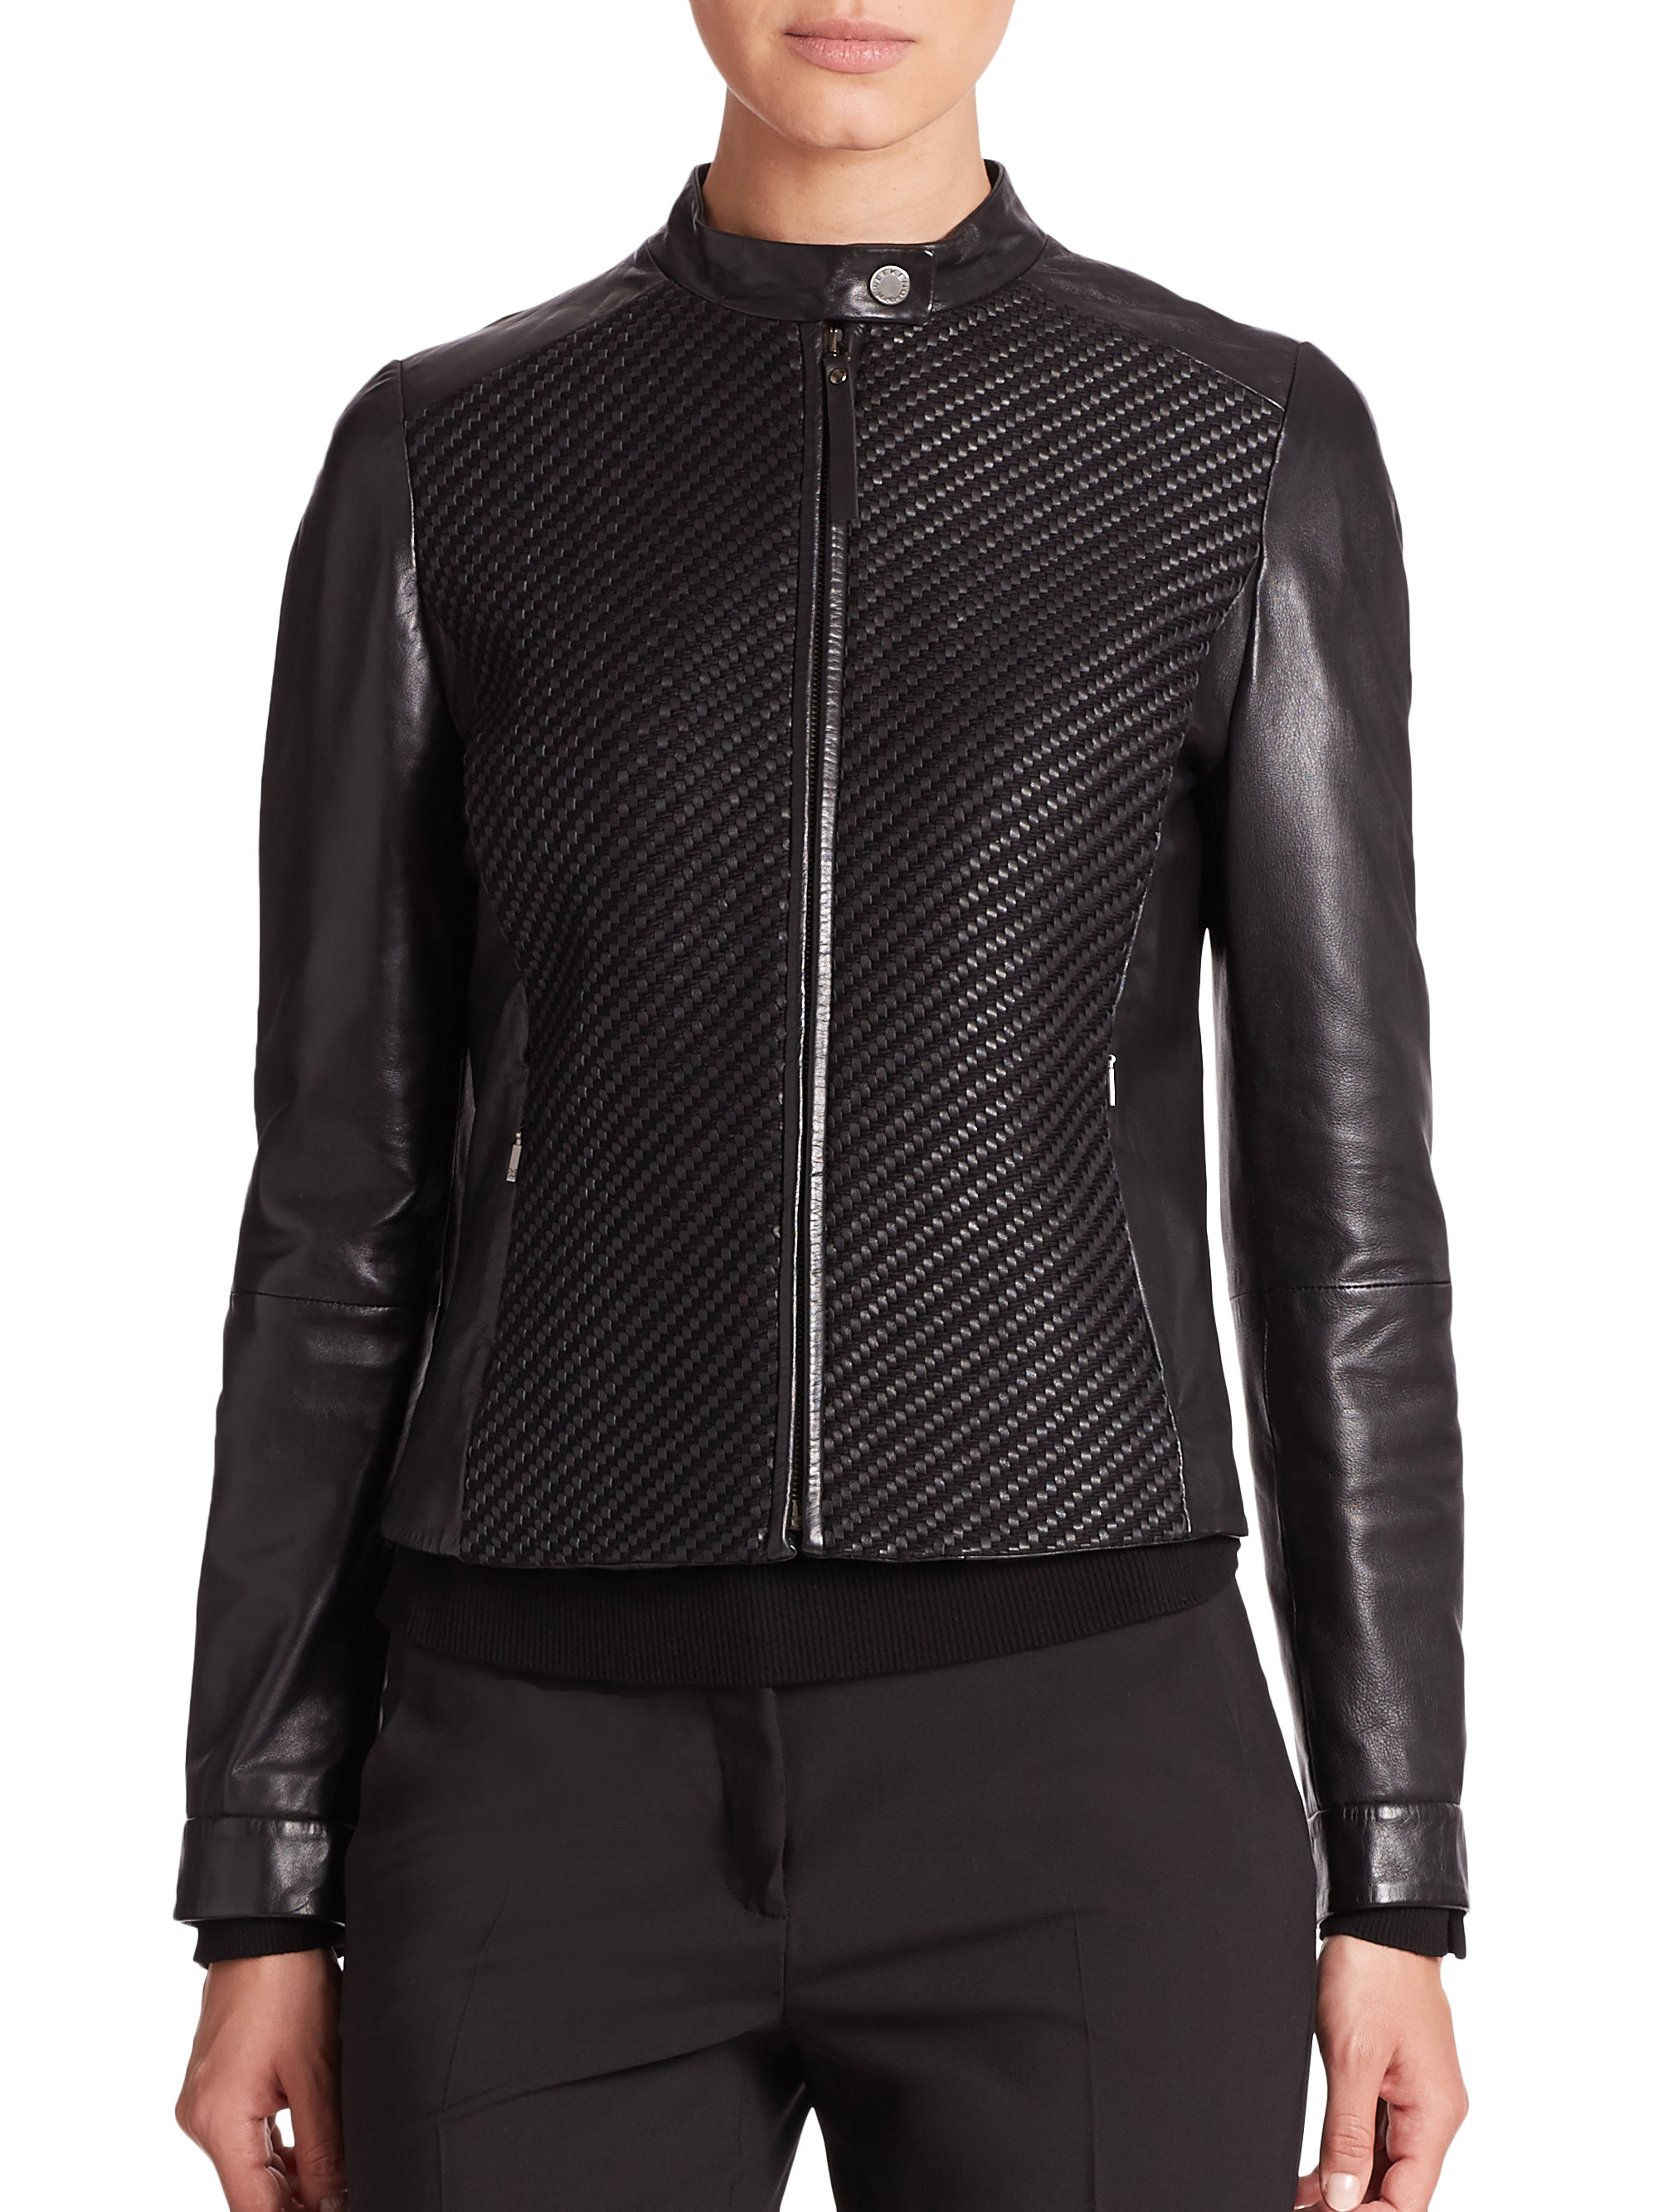 Lyst - Weekend By Maxmara Placido Leather Jacket in Black